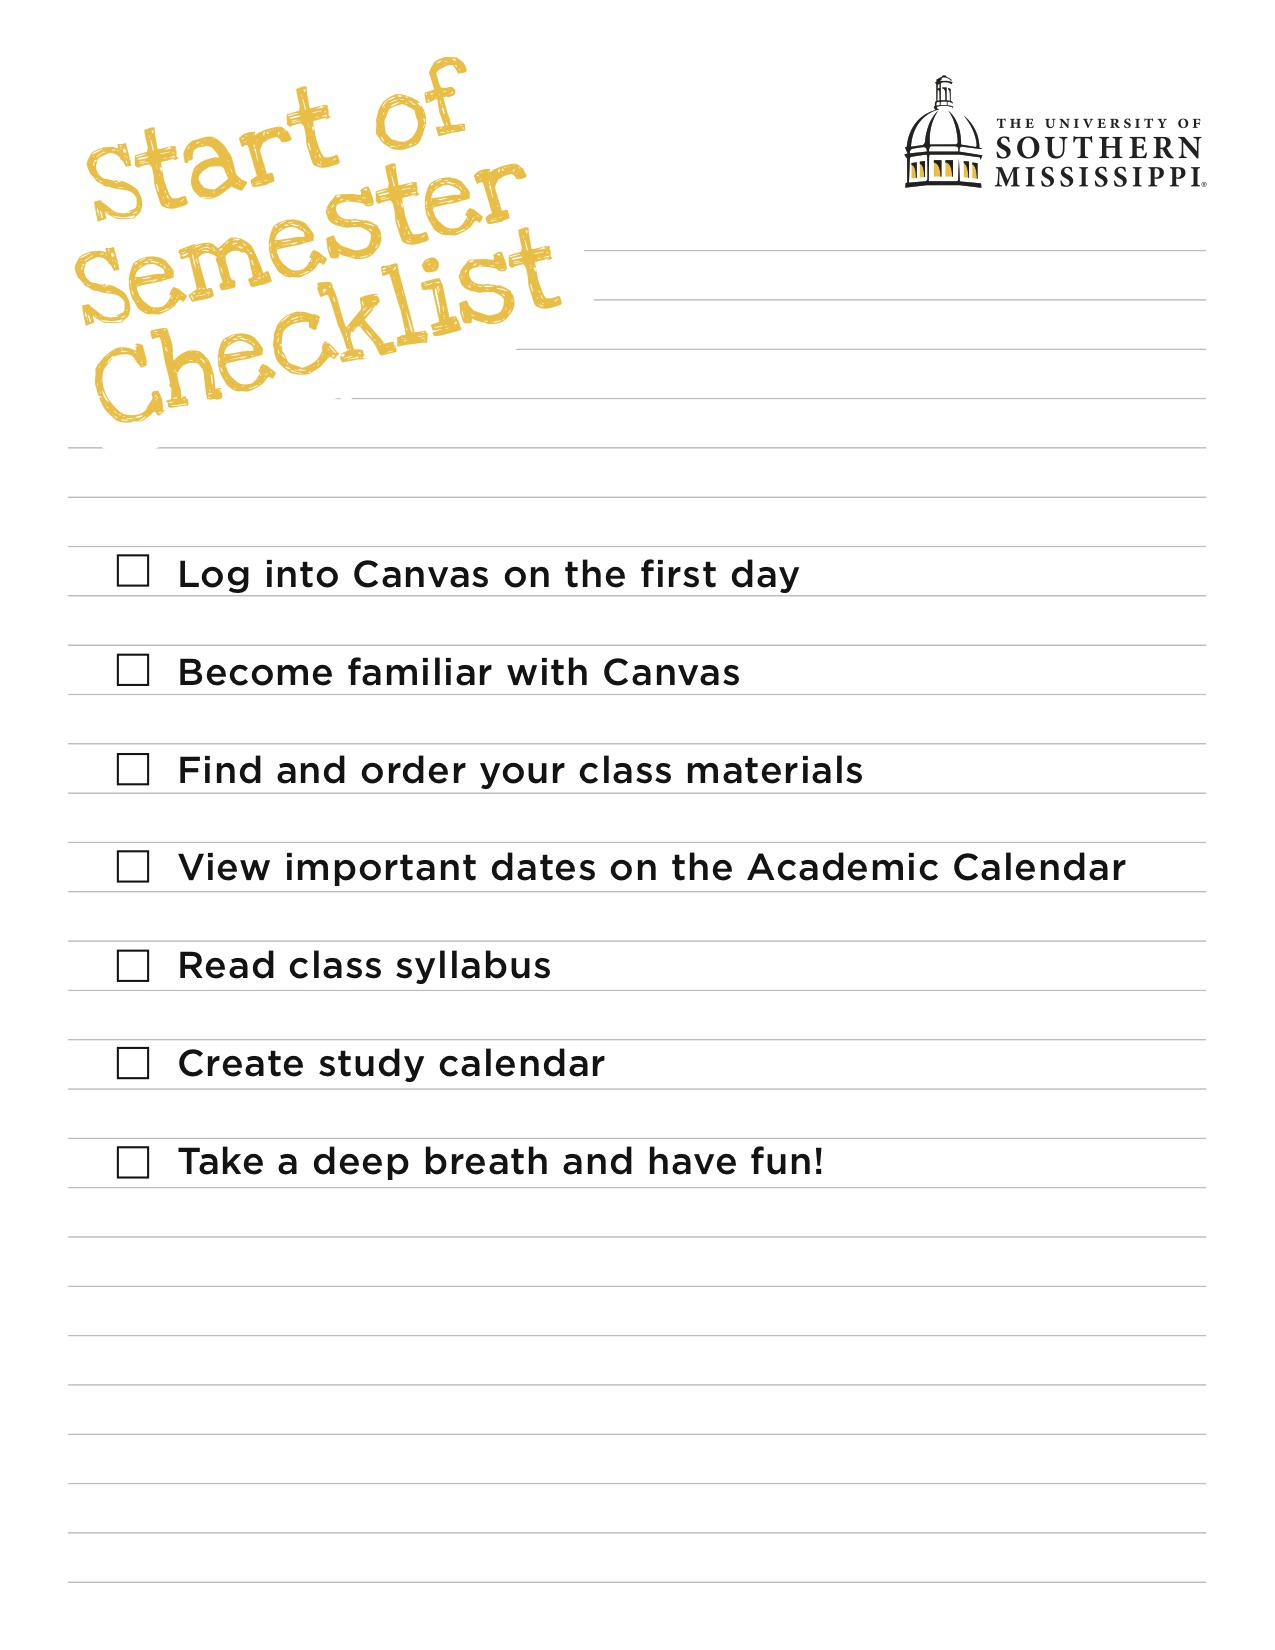 start-of-semester-checklist-online-at-southern-miss